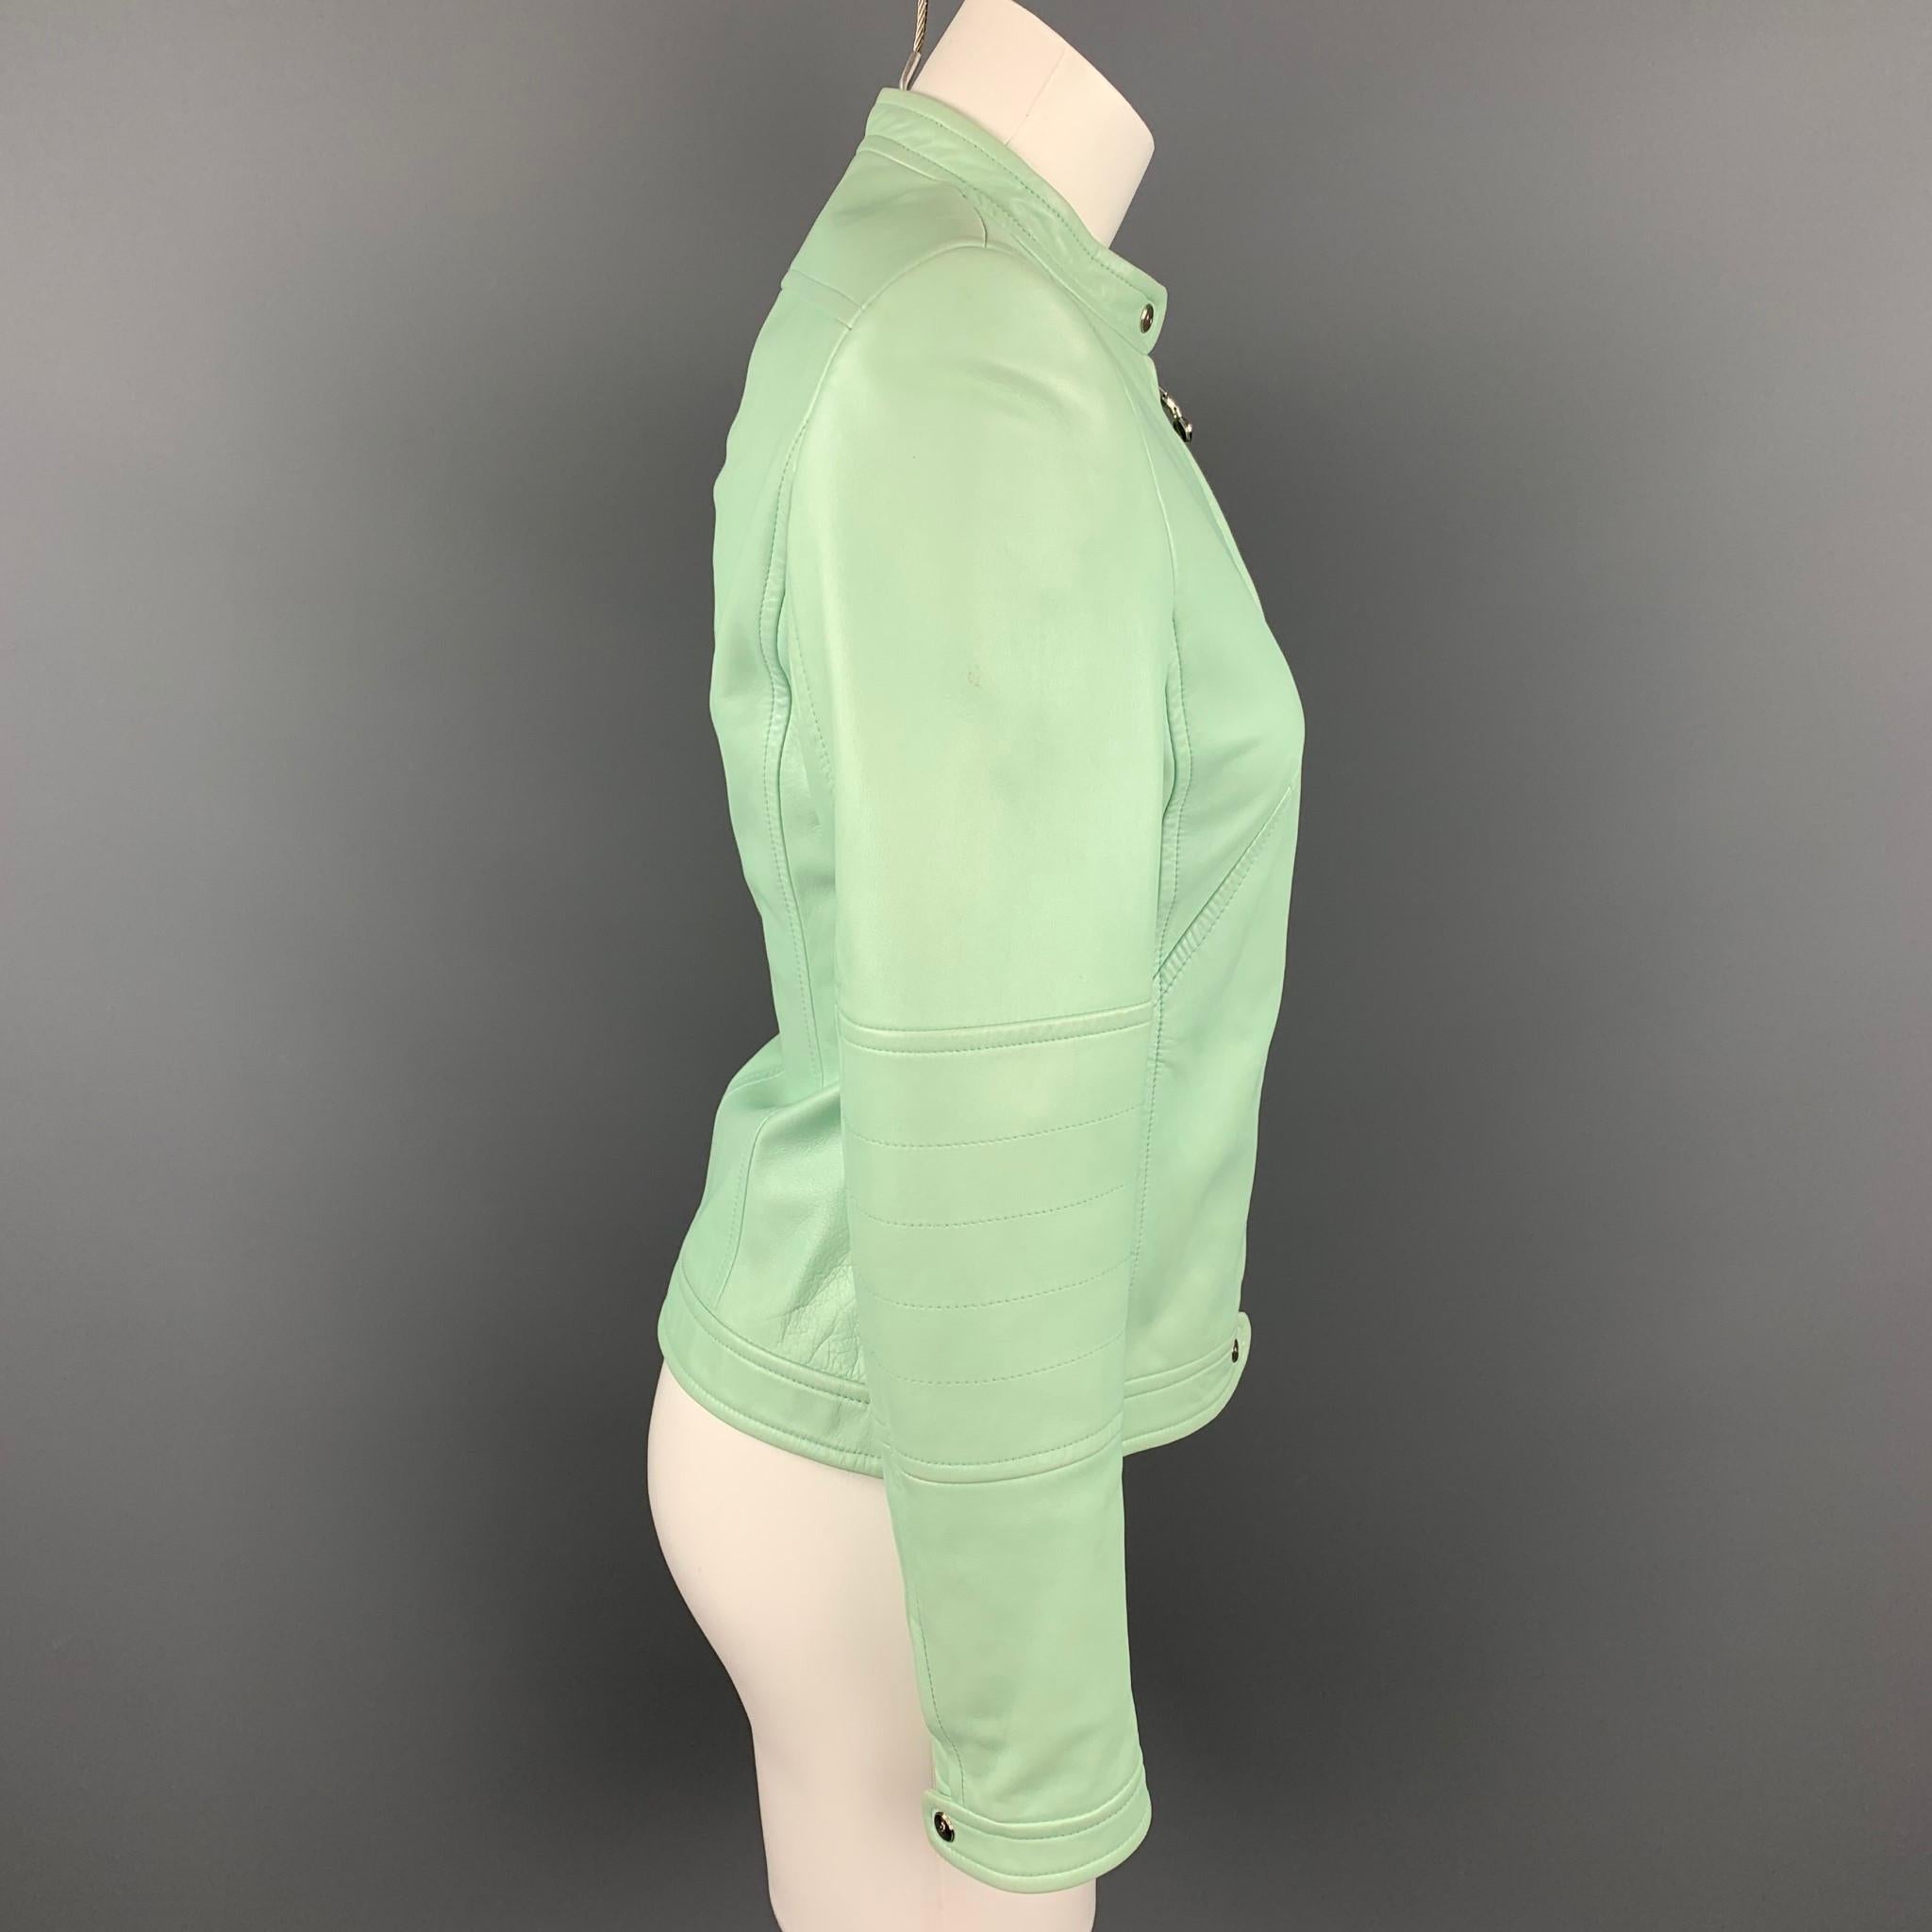 ESCADA jacket comes in a mint leather with a monogram print liner featuring a motorcycle style and a zip up closure. Moderate wear.

Very Good Pre-Owned Condition.
Marked: 34

Measurements:

Shoulder: 15 in.
Bust: 34 in.
Sleeve: 24 in.
Length: 21